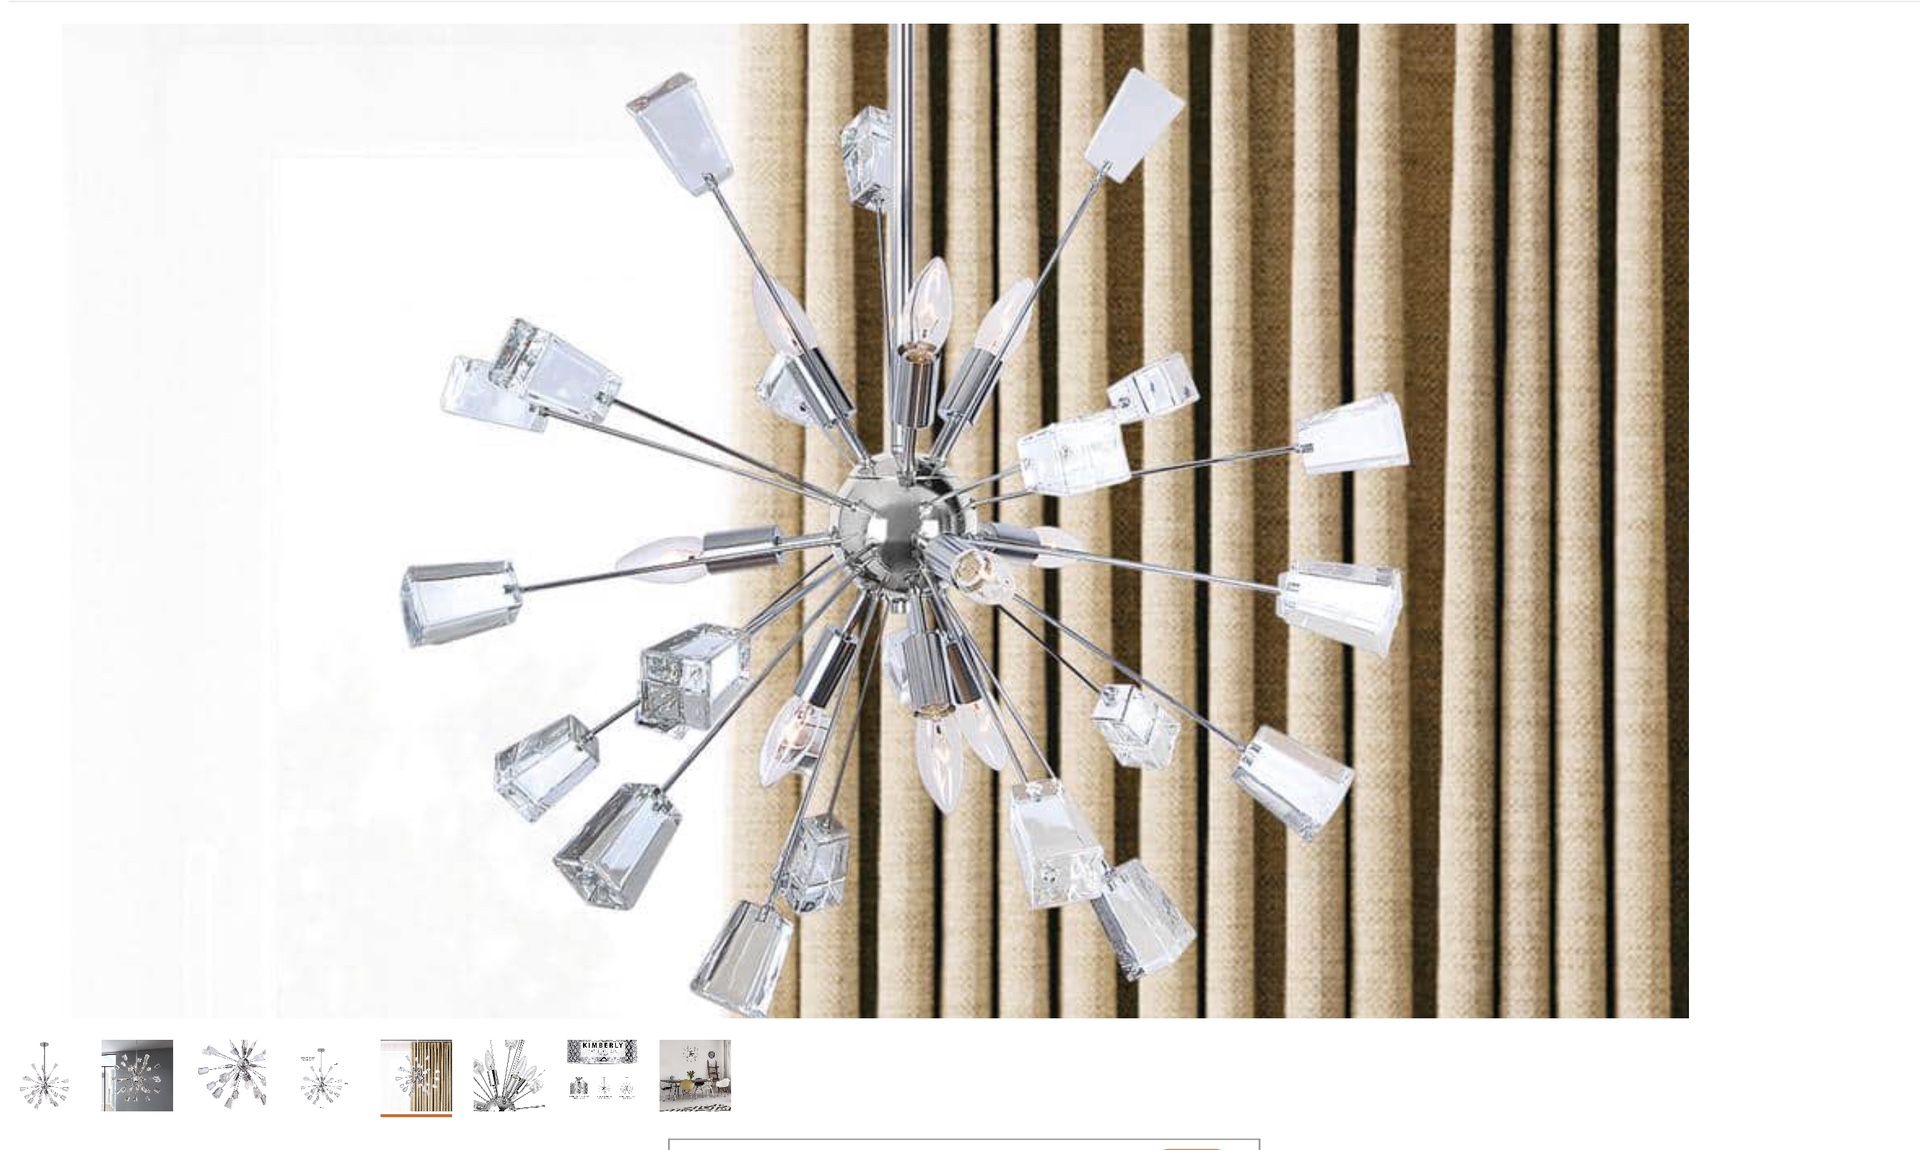 This beautiful chandelier new in box  retail price is $305 wt tax here  only $240 no tax brand new  Home Decorators Collection Kimberly 9-Light Crysta